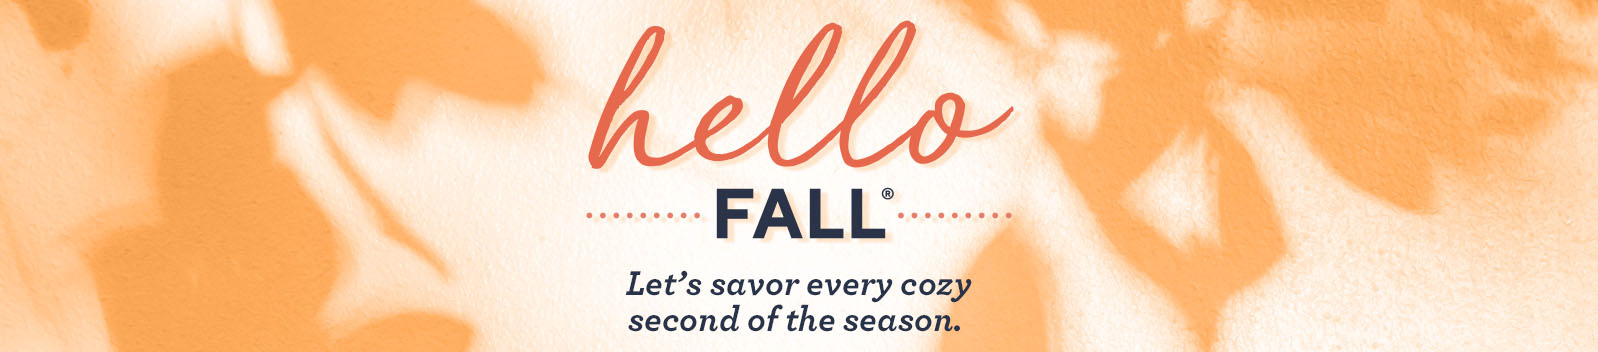 Hello Fall®: Let's savor every cozy second of the season.